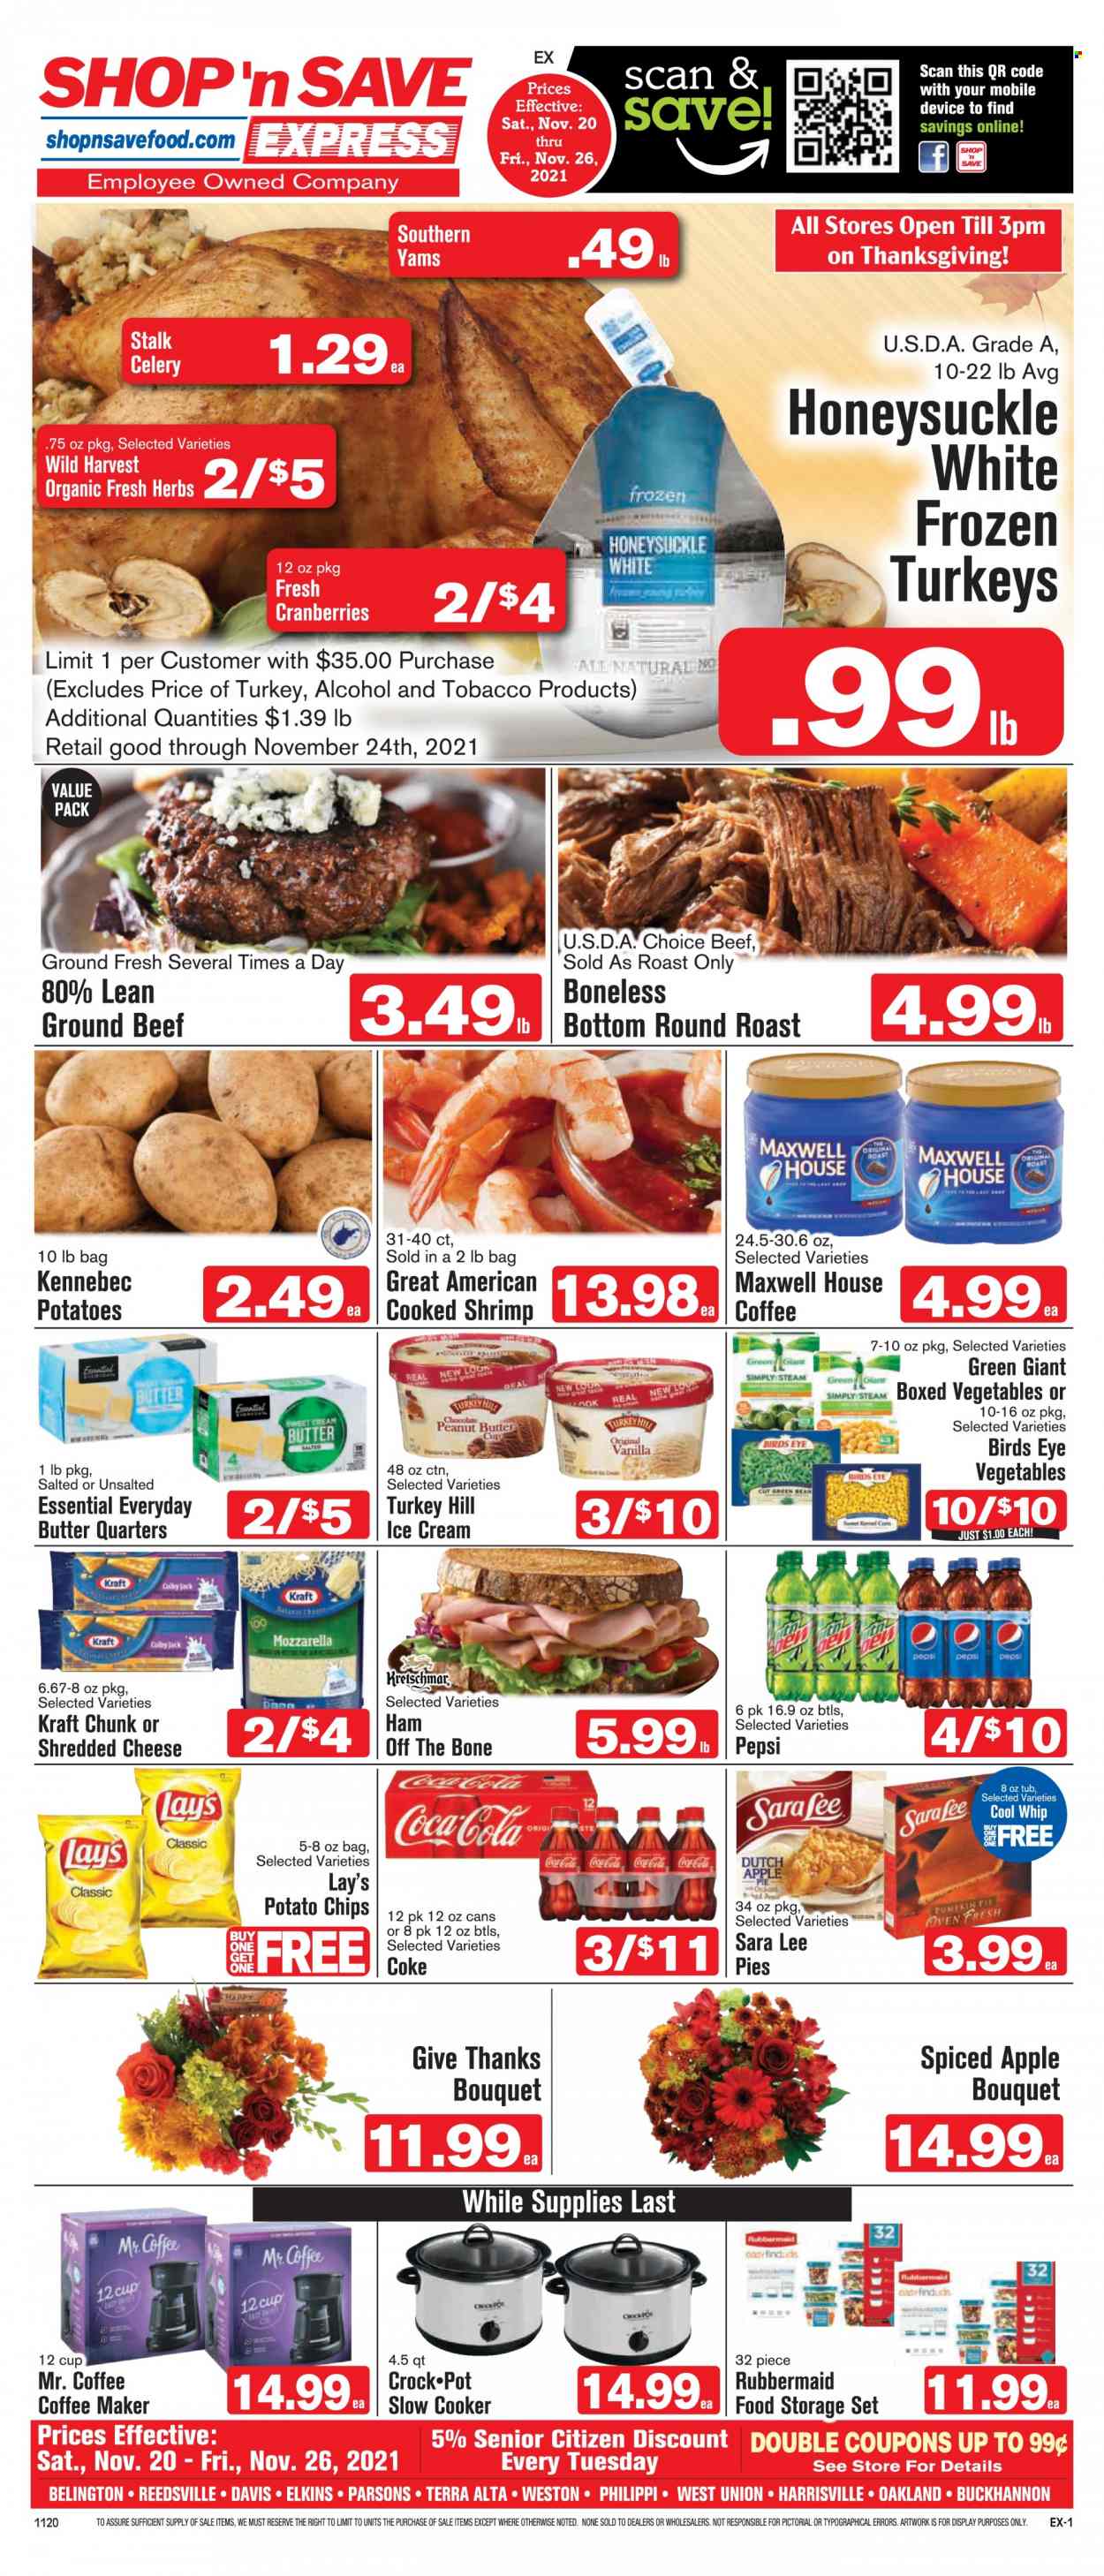 Shop ‘n Save Express Flyer - 11/20/2021 - 11/26/2021 - Sales products - cake, pie, Sara Lee, apple pie, celery, Wild Harvest, turkey meat, beef meat, ground beef, round roast, shrimps, Bird's Eye, Kraft®, ham, ham off the bone, colby cheese, mozzarella, shredded cheese, Cool Whip, peanut butter cups, potato chips, Lay's, cranberries, herbs, peanut butter, Coca-Cola, Pepsi, Maxwell House, alcohol. Page 1.